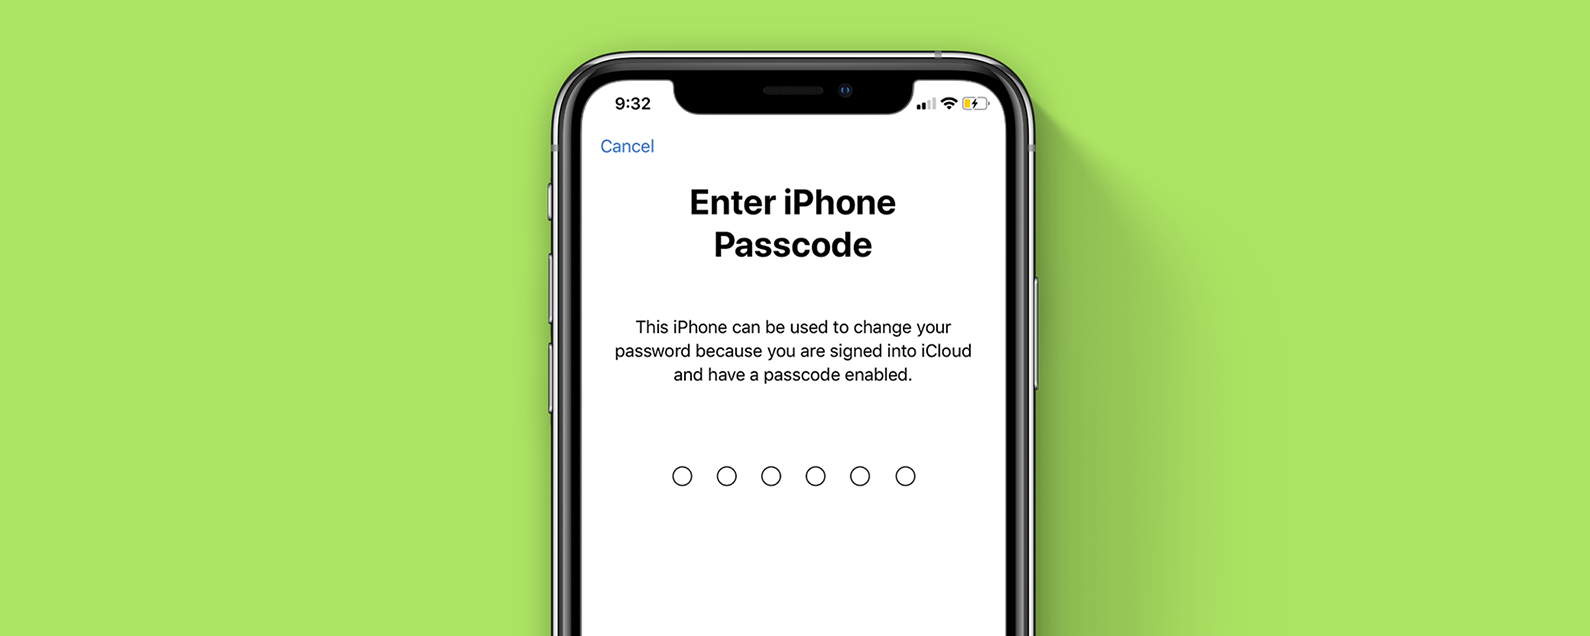 How To Find Your Apple Id On Iphone - designbyill